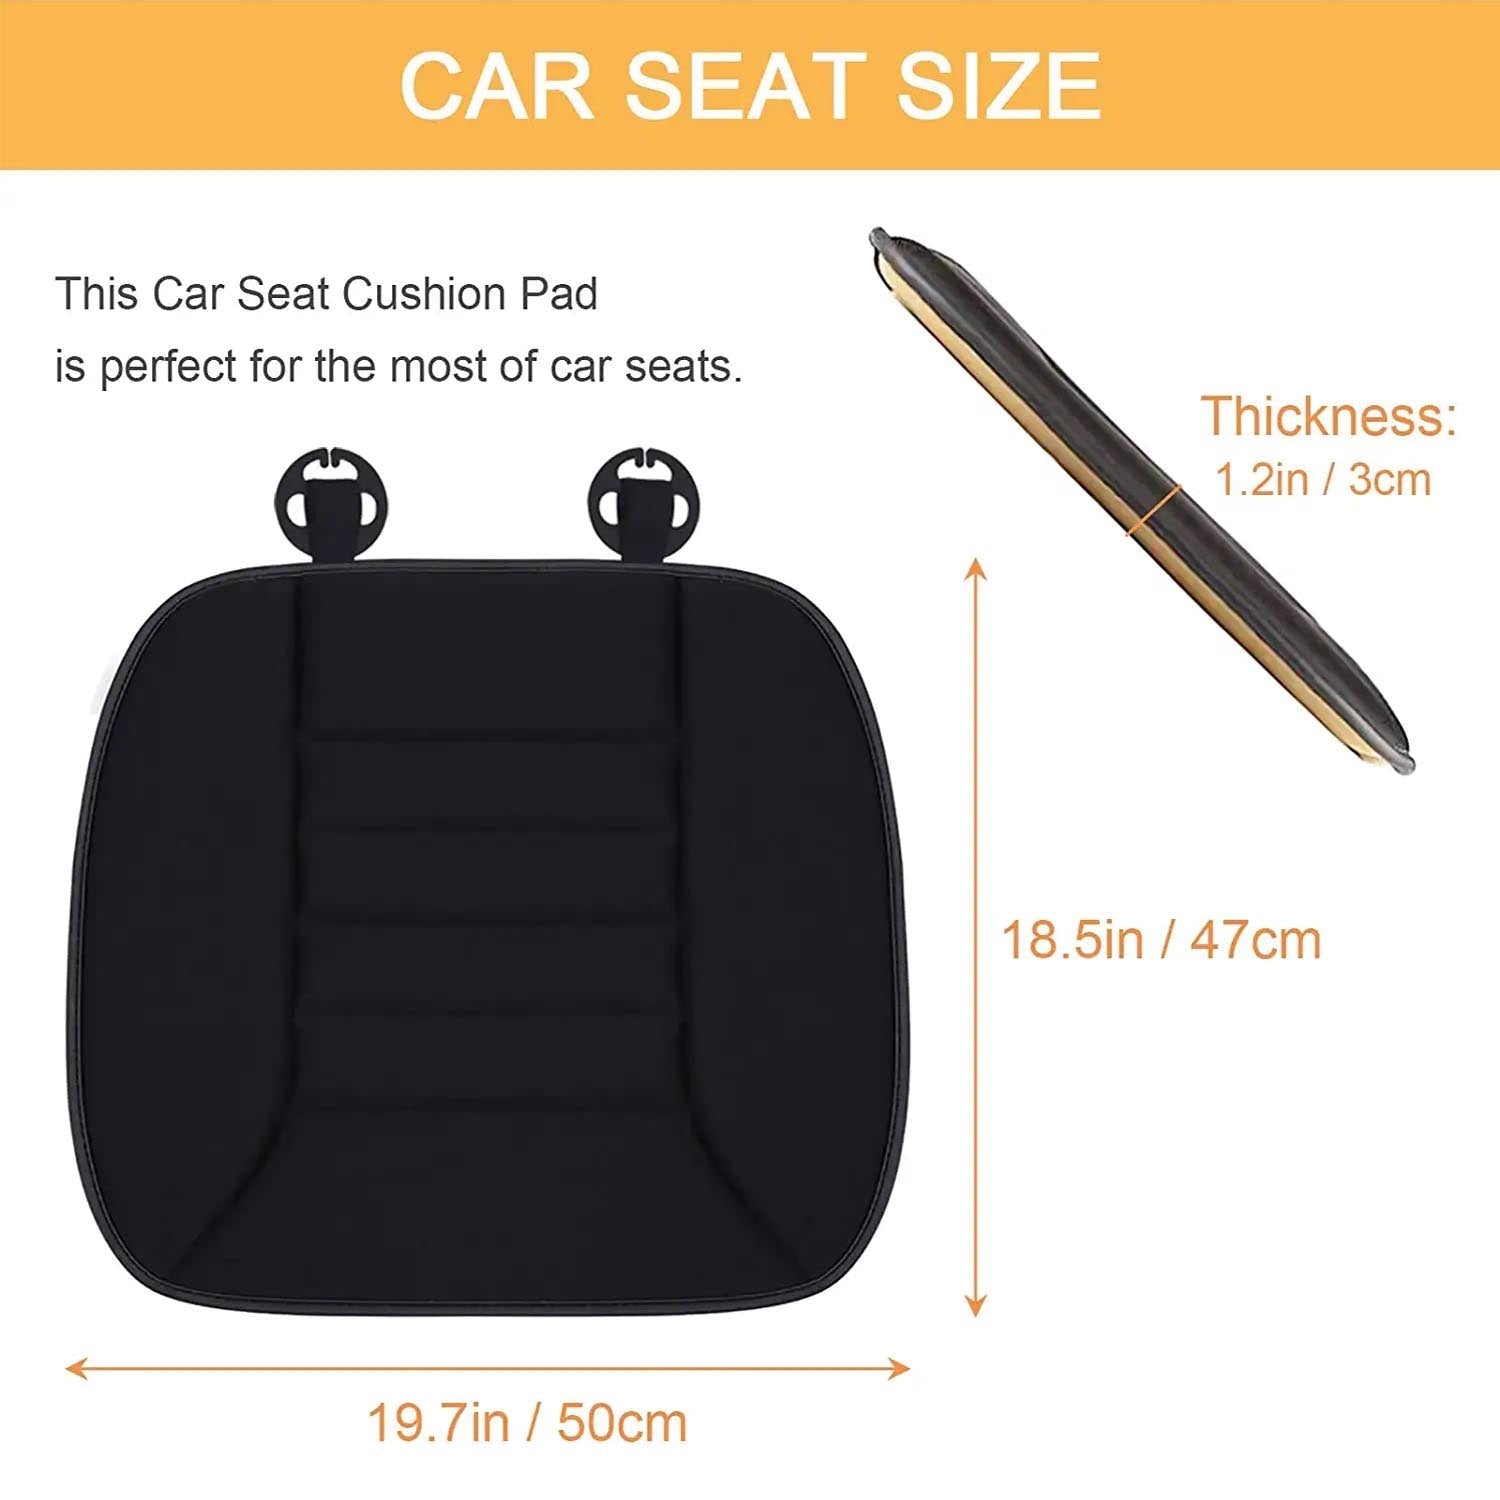 Car Seat Cushion with 1.2inch Comfort Memory Foam, Custom Logo For Your Cars, Seat Cushion for Car and Office Chair LM19989 - Delicate Leather